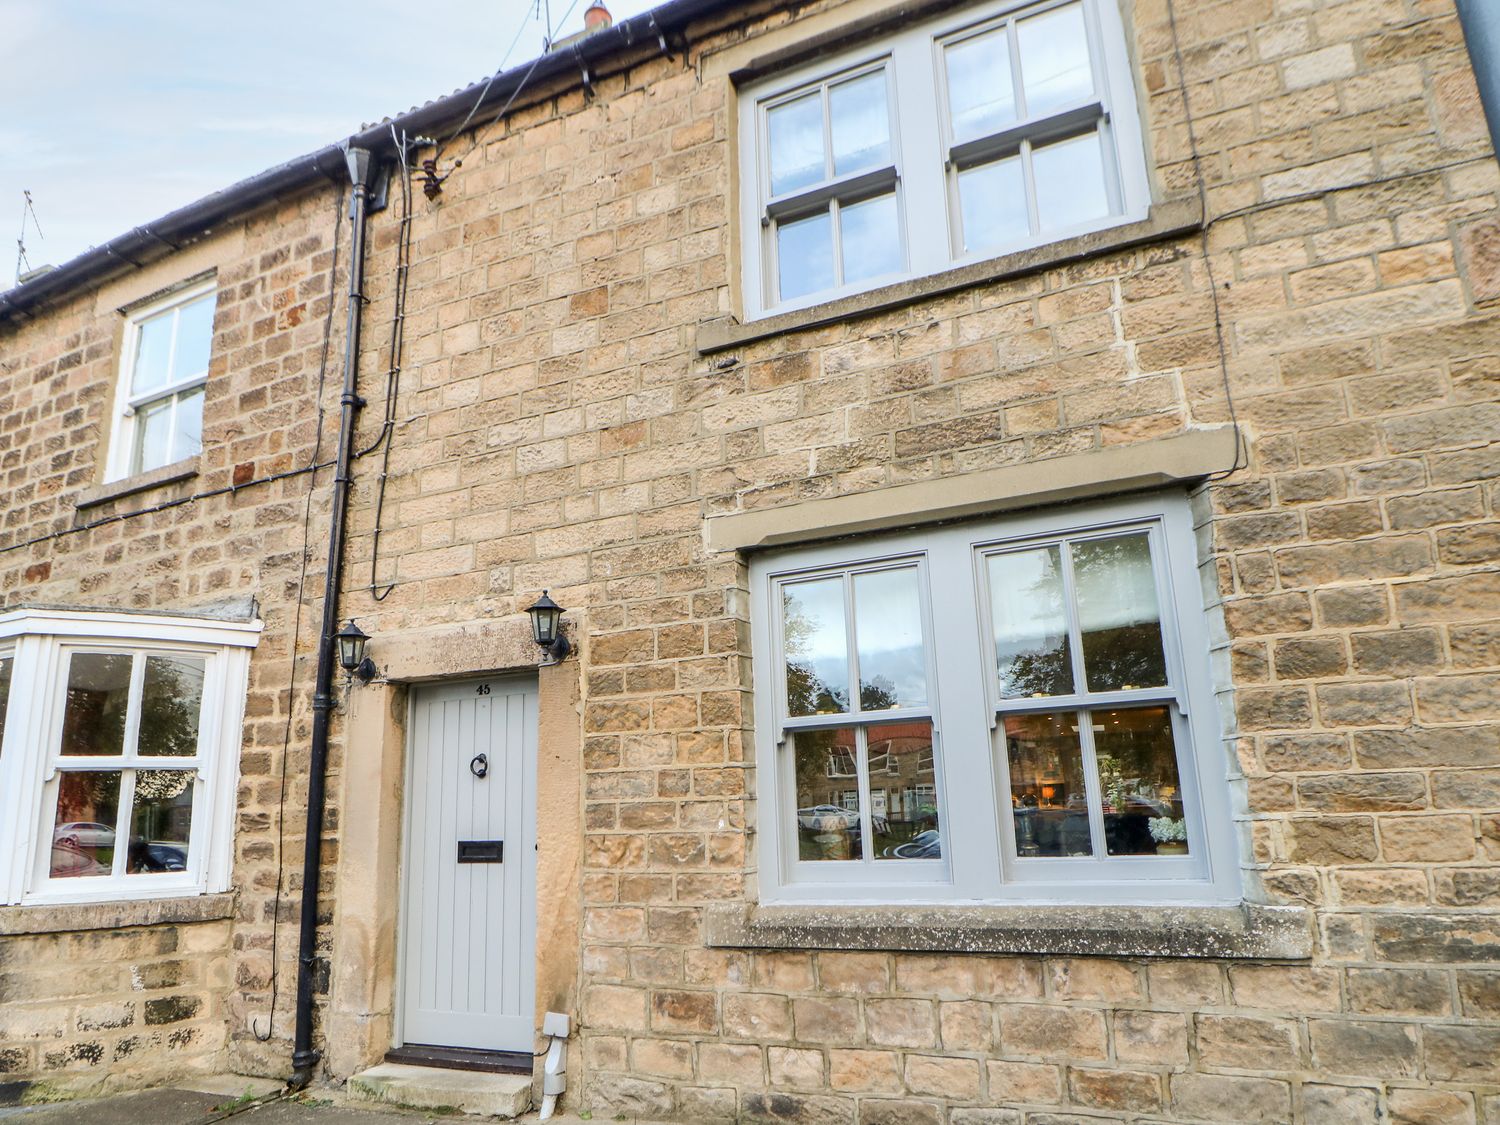 45 South Green - Yorkshire Dales - 1084931 - photo 1